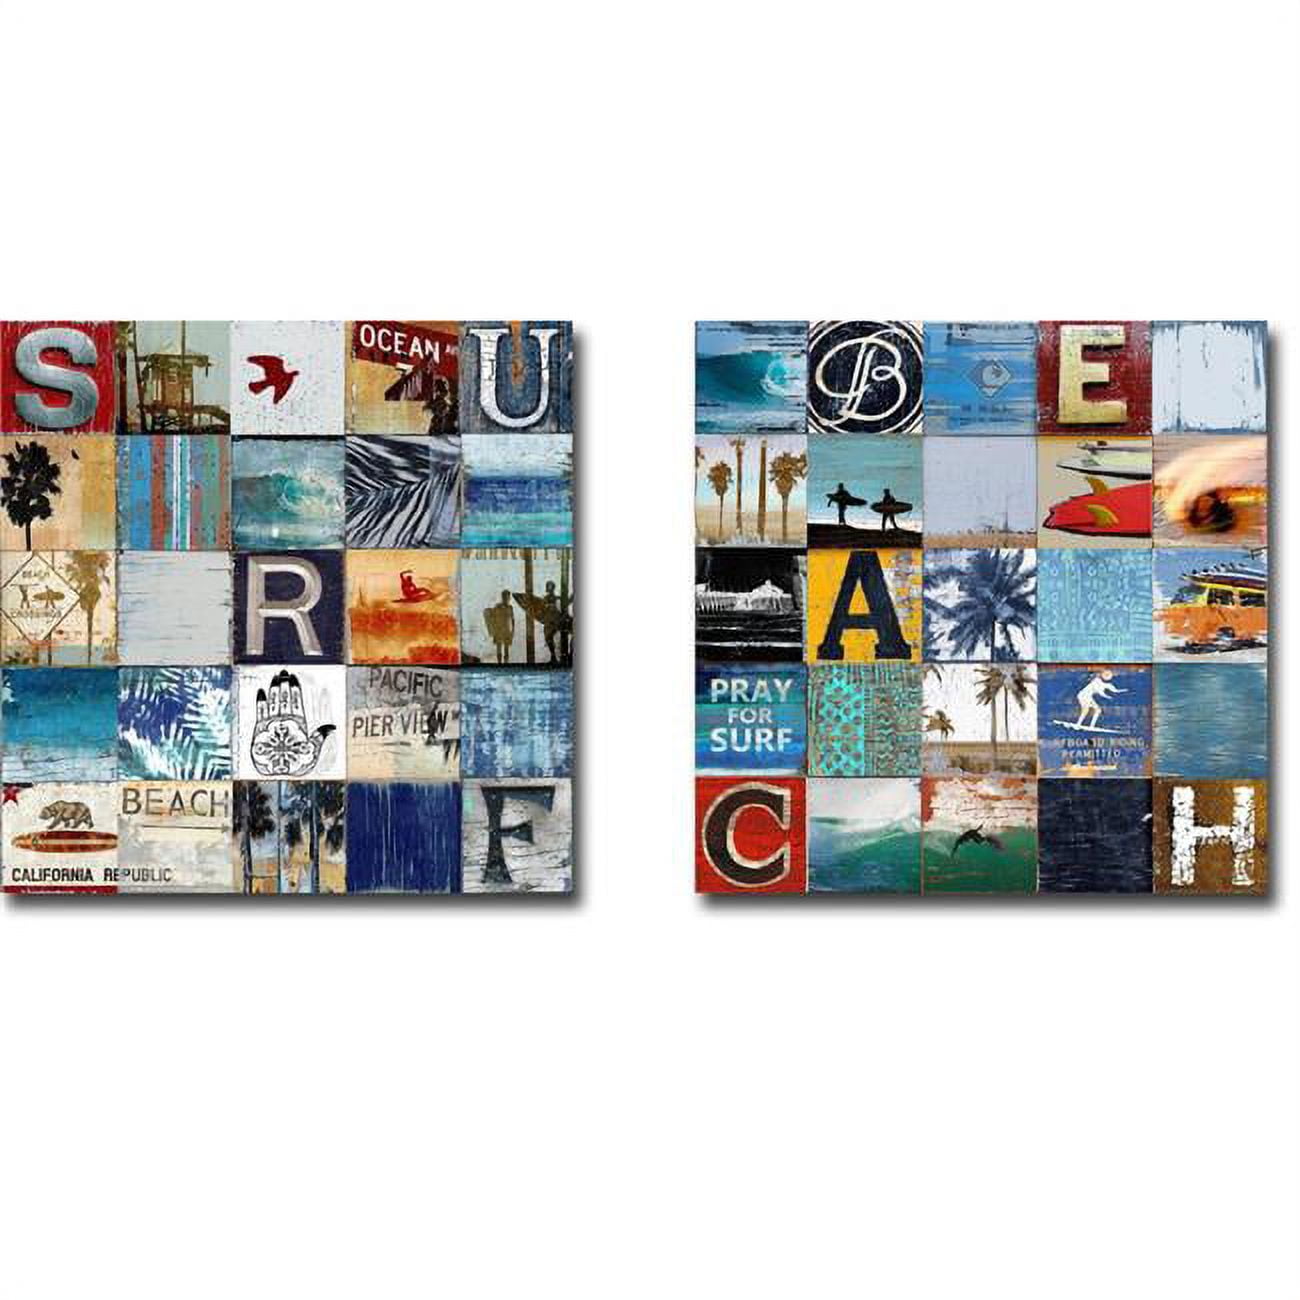 36364853tg Surf City & Beach Town By Charlie Carter 2-piece Premium Oversize Gallery-wrapped Canvas Giclee Art Set - 36 X 36 In.